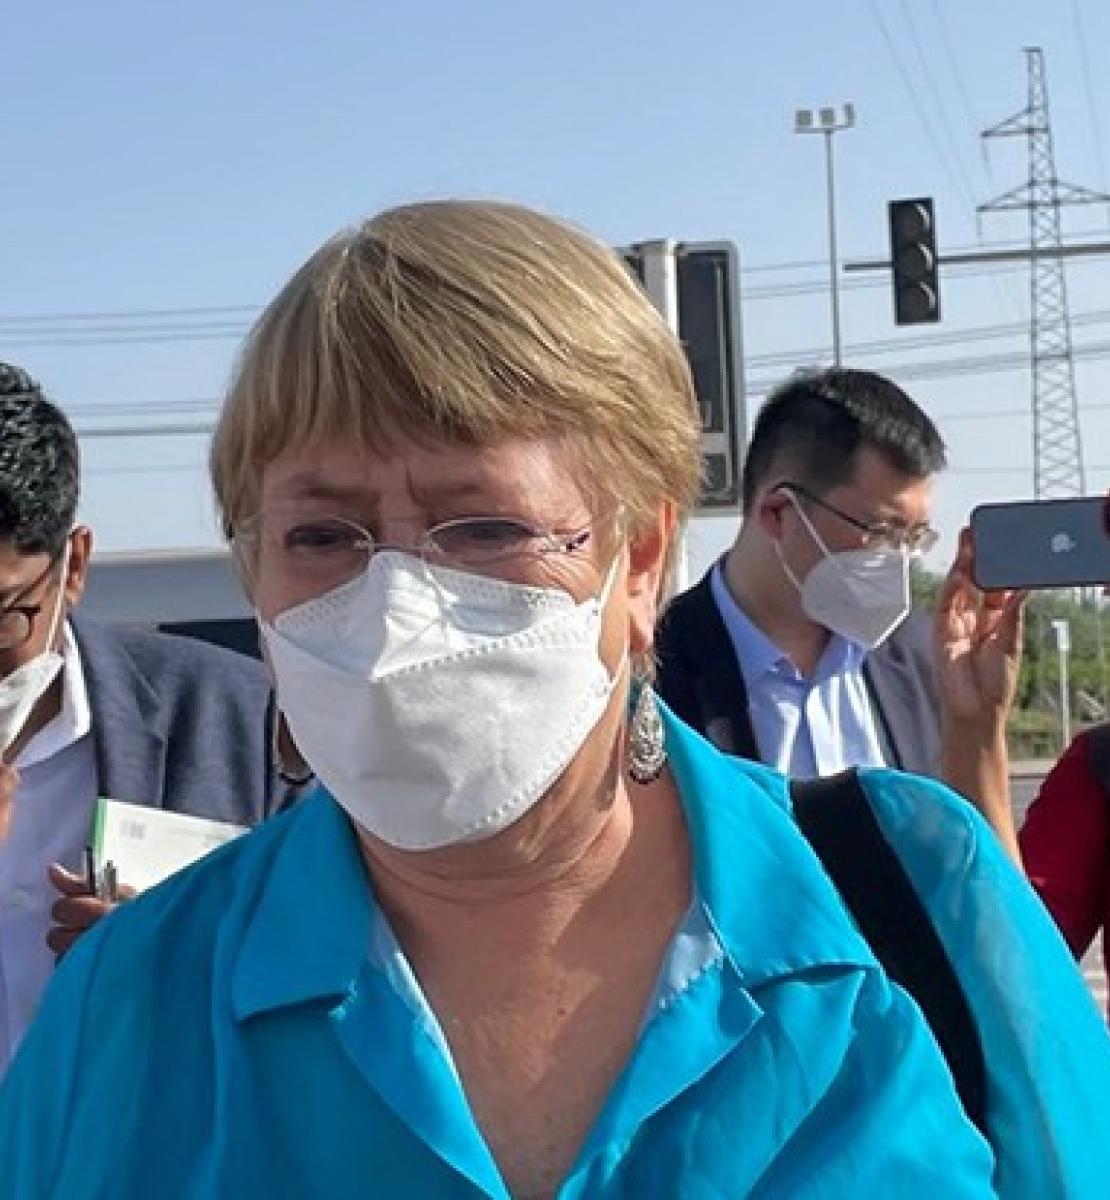 High Commissioner Michelle Bachelet during her visit to China, in Ürümqi, Xinjiang Uyghur Autonomous Region, China.